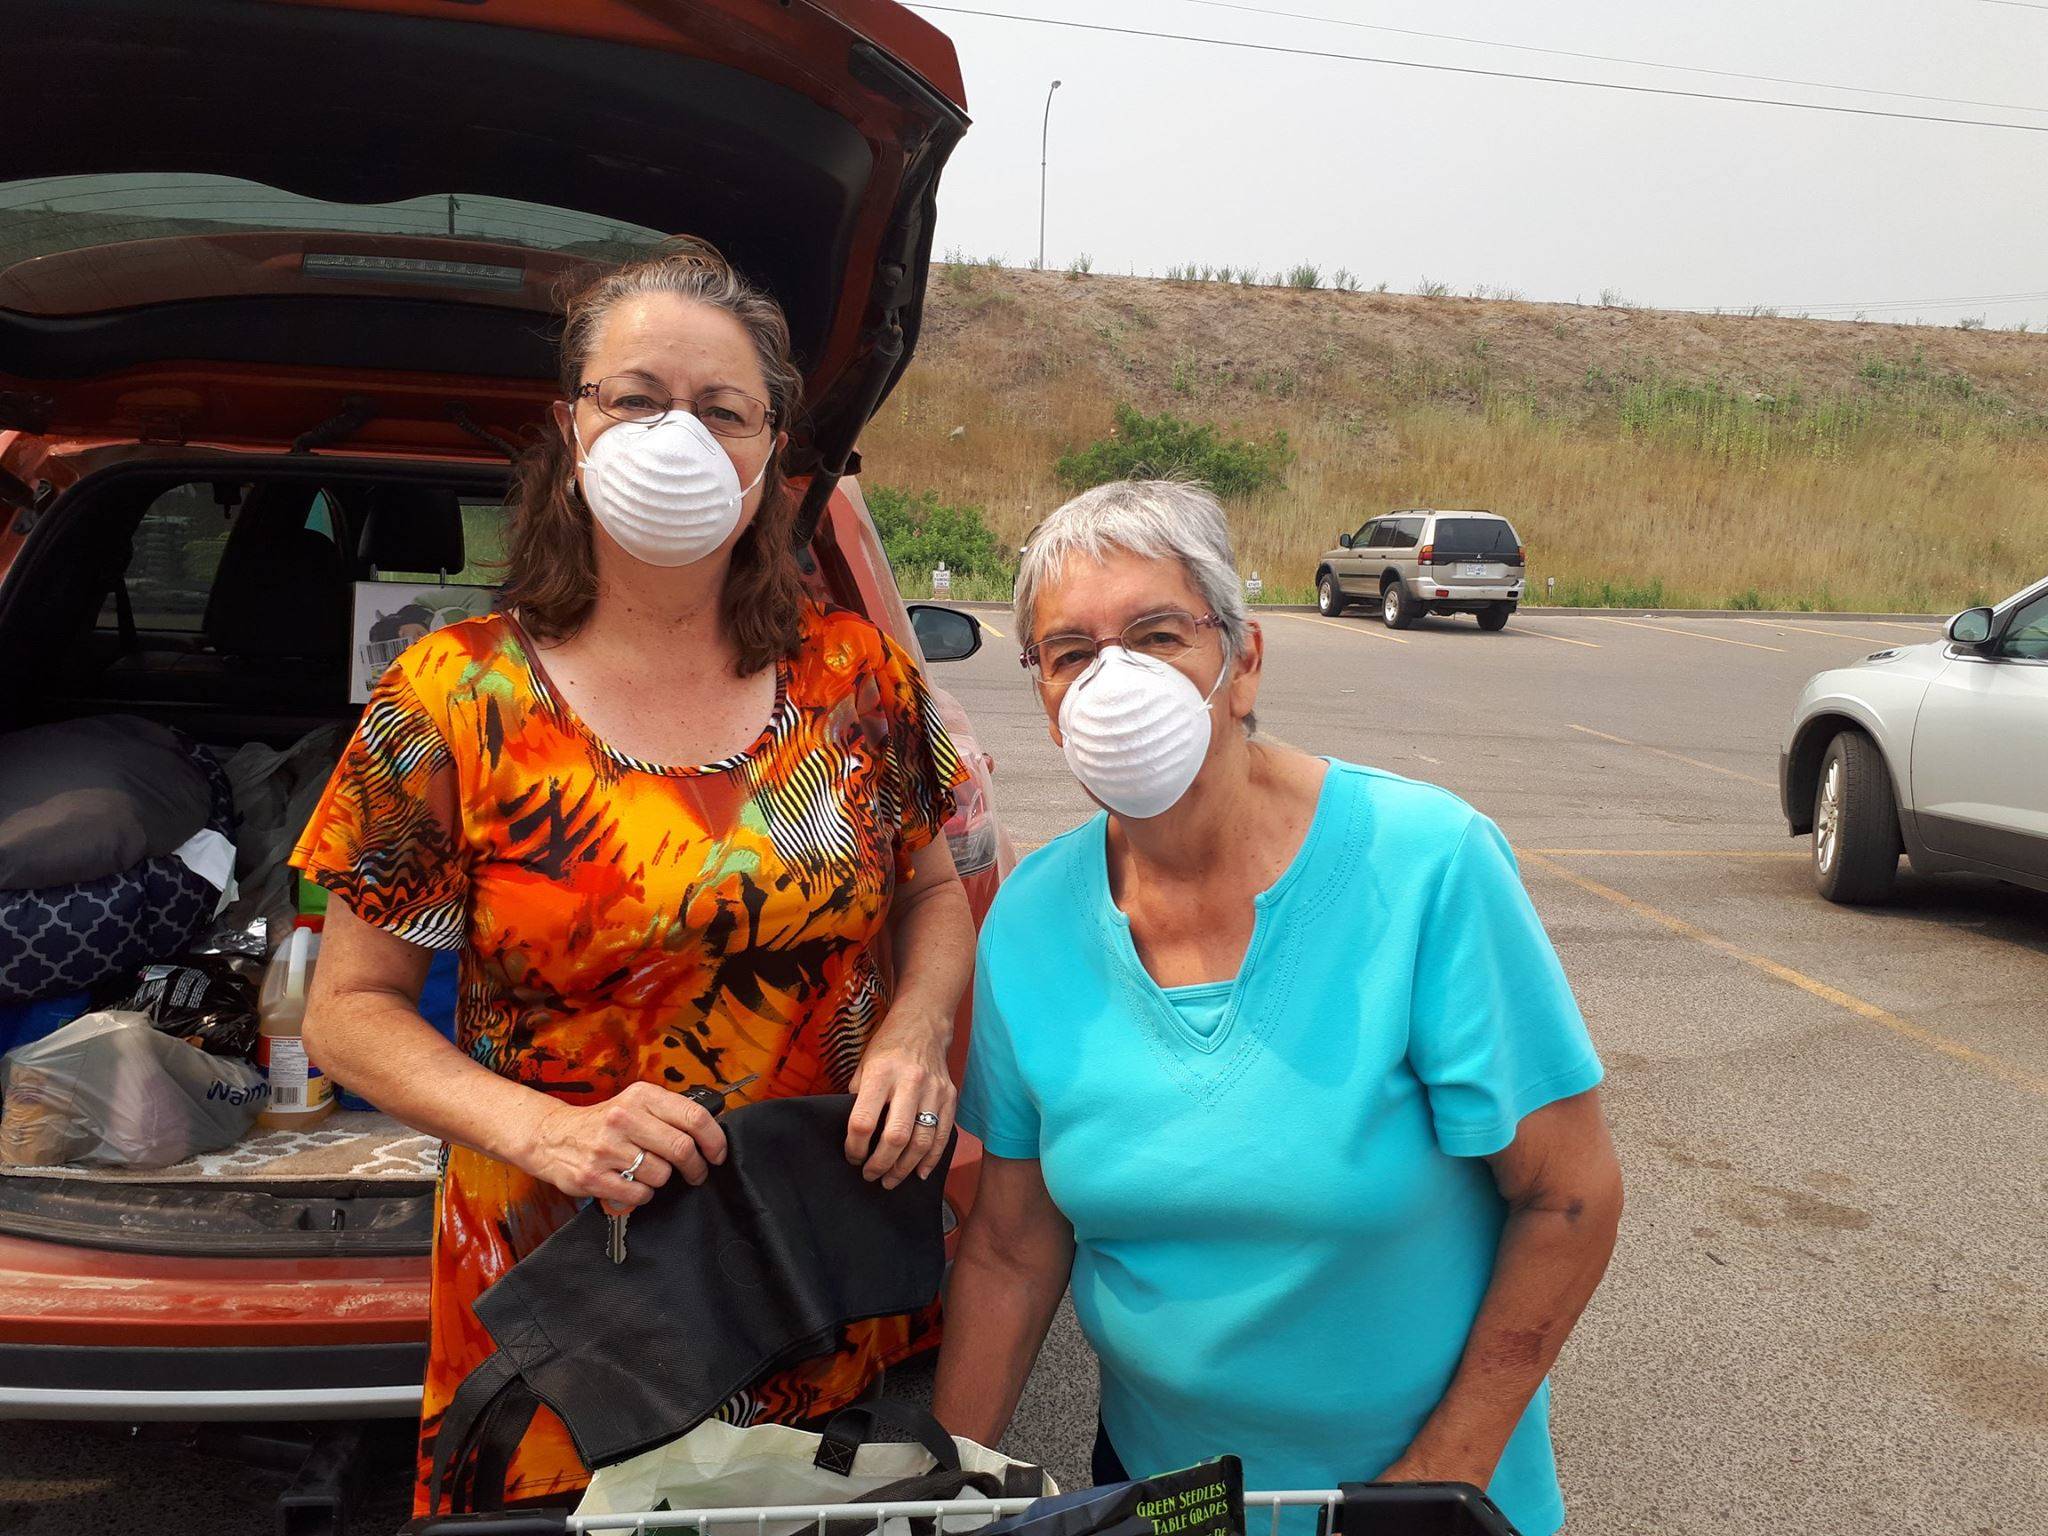 Williams Lake residents Diana Galisky and her mom Betty Rucker – who were evacuated from Spokin Lake Road Friday – were wearing masks given to them for free by Wholesale Club Sunday afternoon. “They also gave us candies for our soar throats,” Diana said. (Photo by Williams Lake reporter Monica Lamb-Yorski)